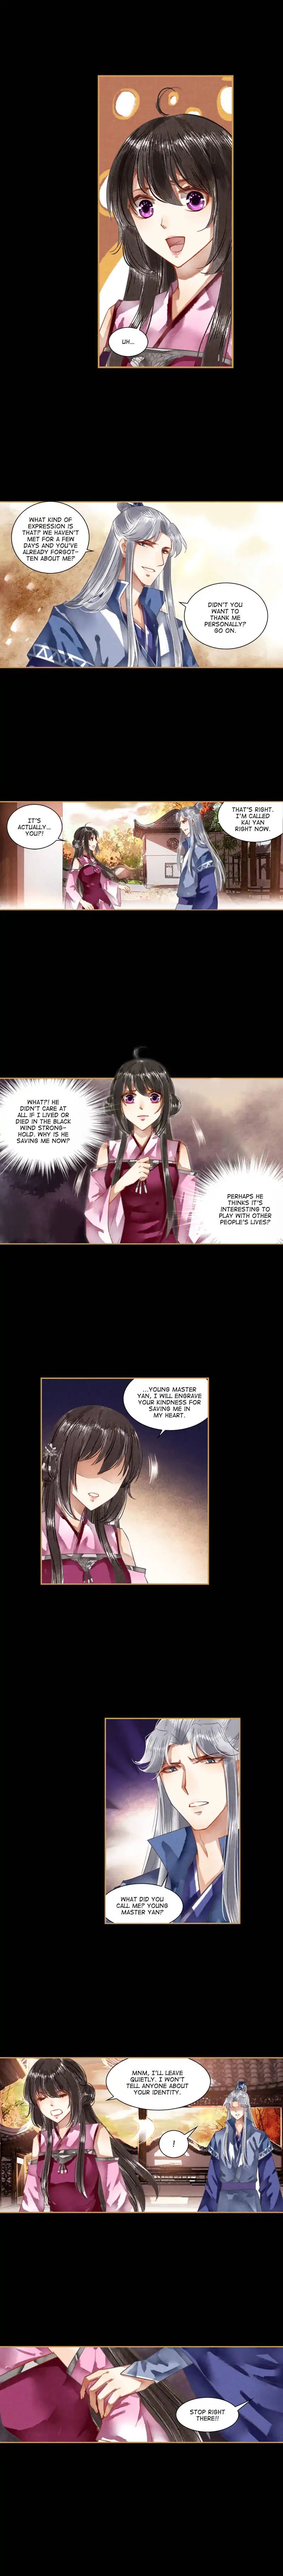 The Favored Concubine - Page 2